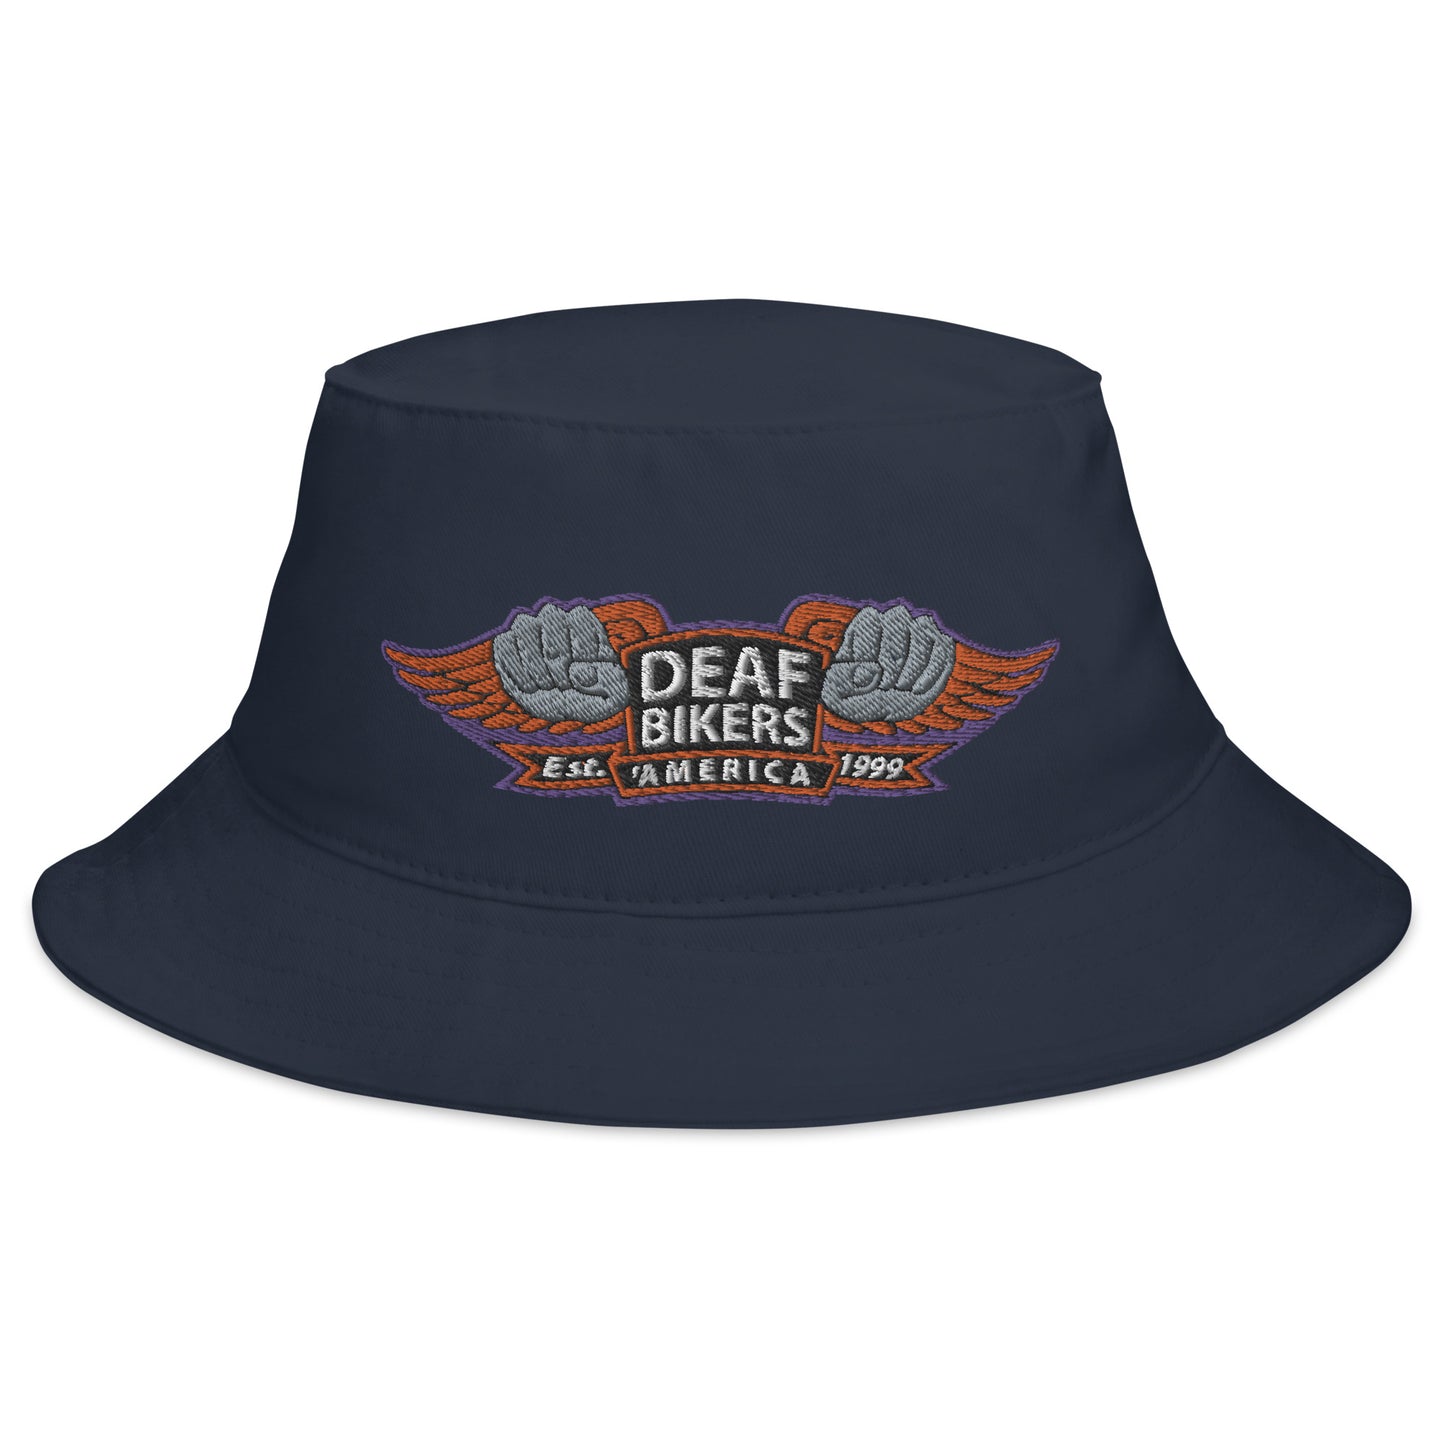 Deaf Bikers of America - Embroidered Bucket Hat